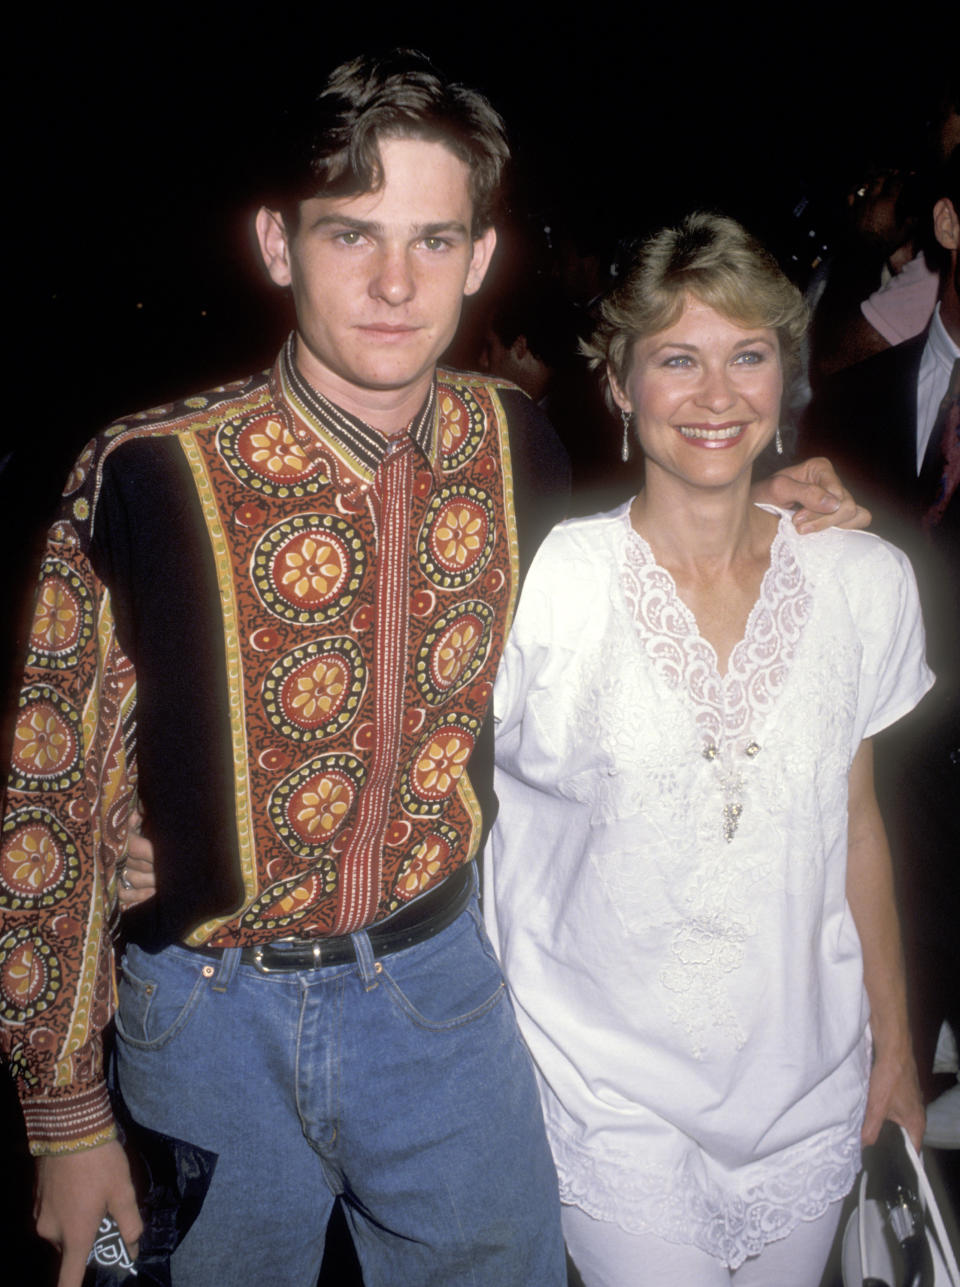 Actor Henry Thomas and Actress Dee Wallace Stone attend the Grand Opening of the New Universal Studios Florida Theme Park Attractions on June 7, 1990 at Universal Studios Florida in Orlando, Florida. (Photo by Ron Galella, Ltd./Ron Galella Collection via Getty Images)